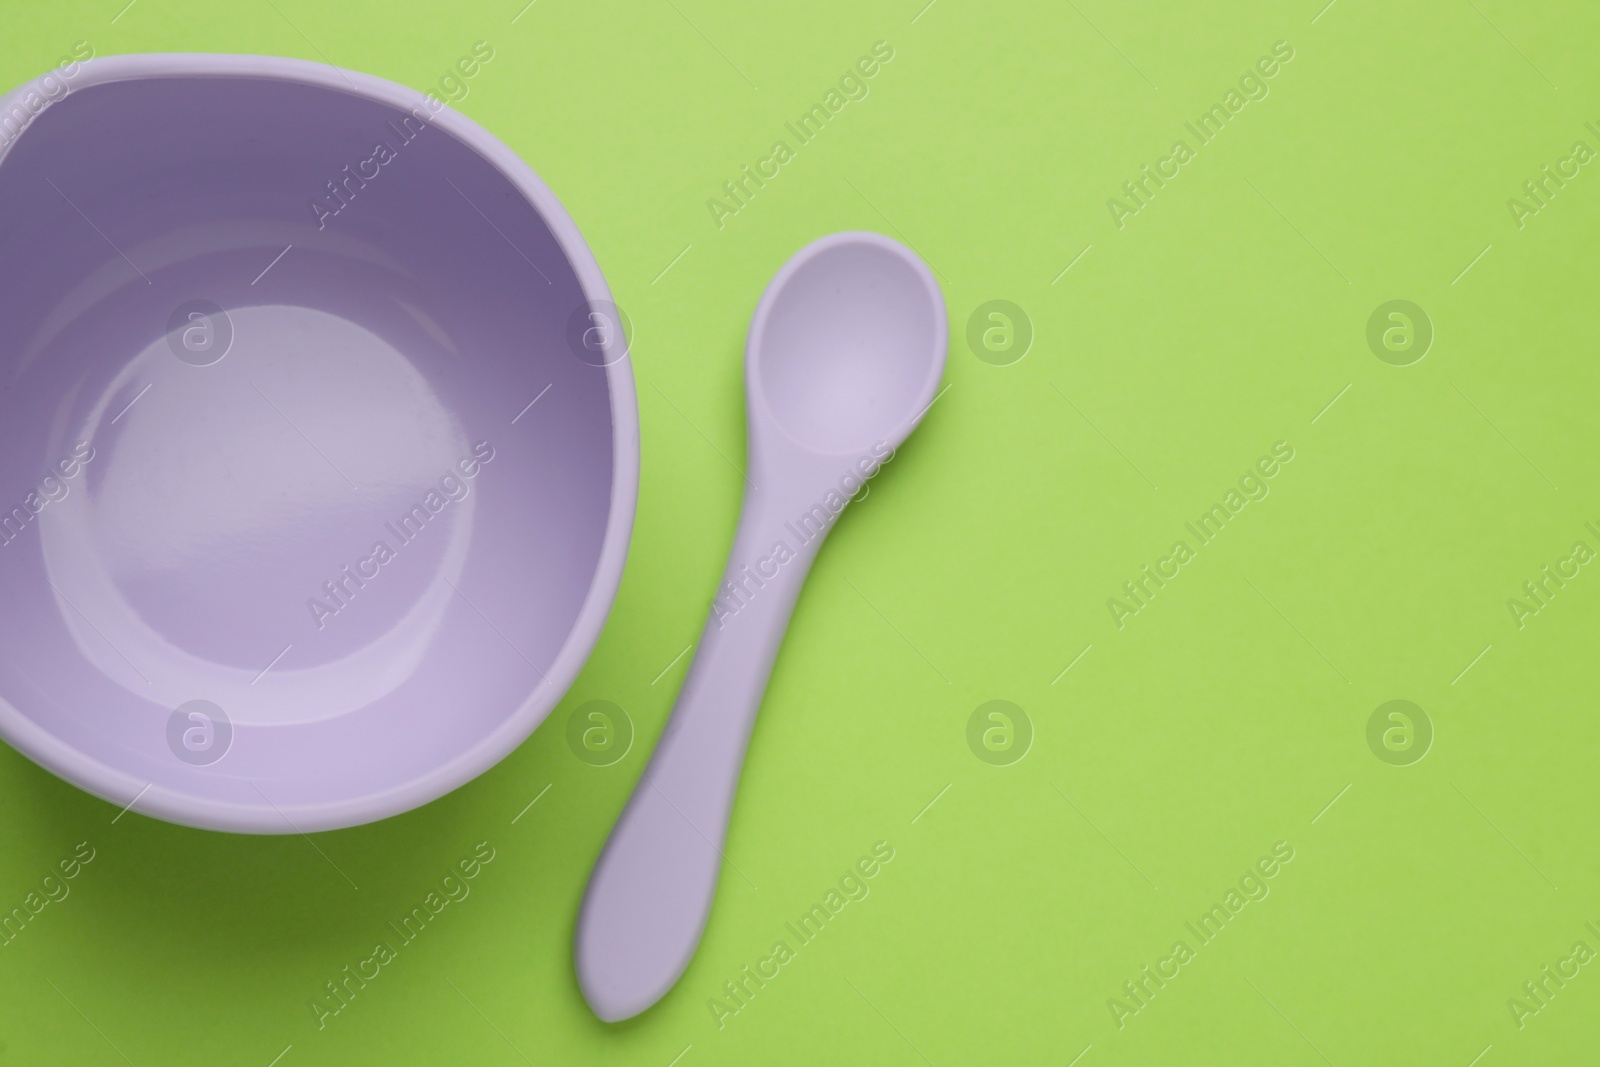 Photo of Plastic bowl and spoon on light green background, flat lay with space for text. Serving baby food